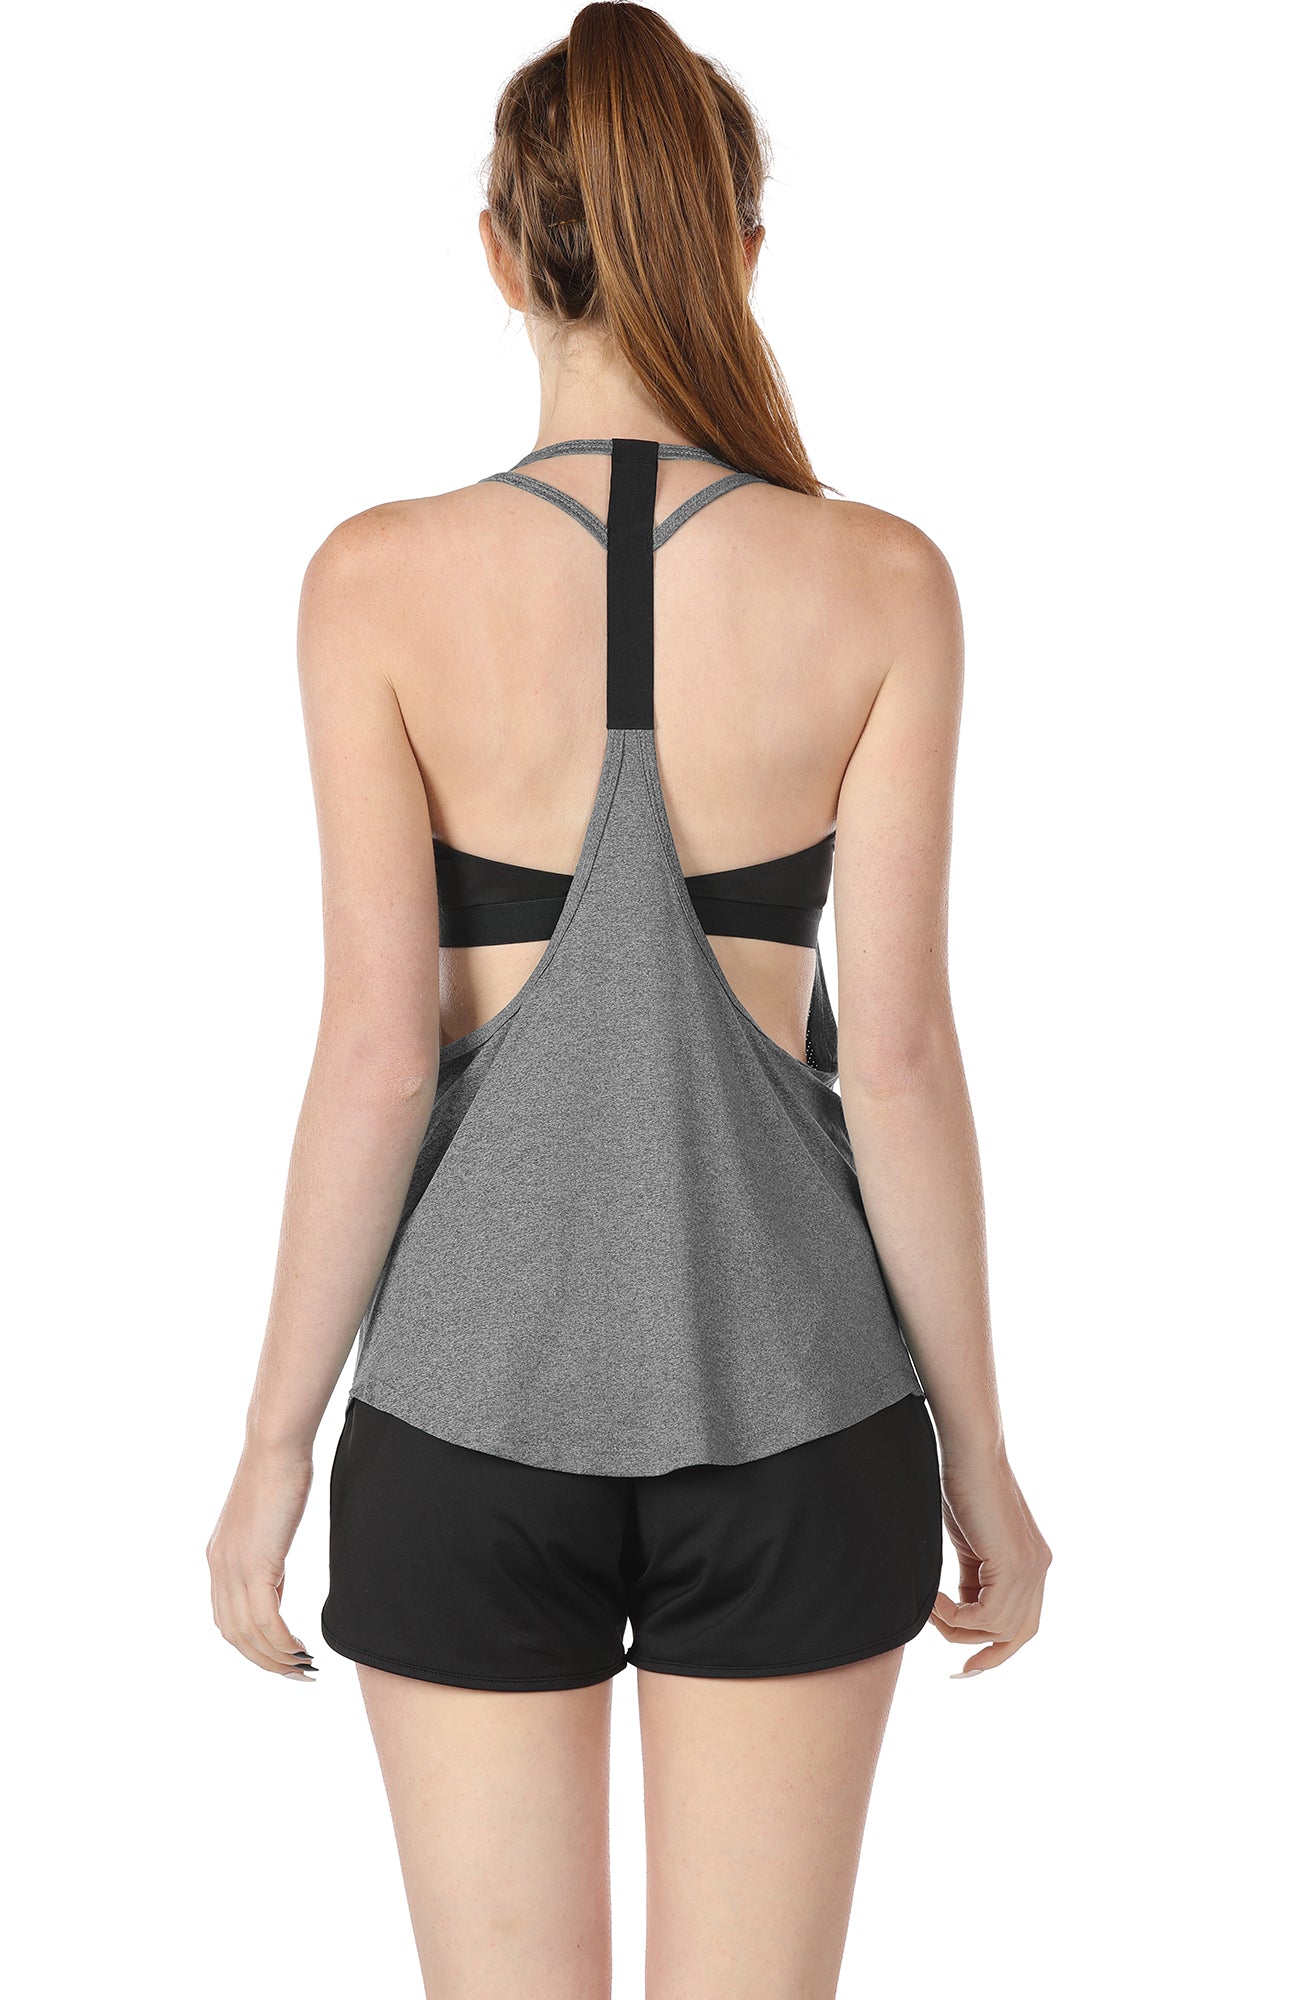 icyzone Workout Tank Tops with Built in Bra - Women's Strappy